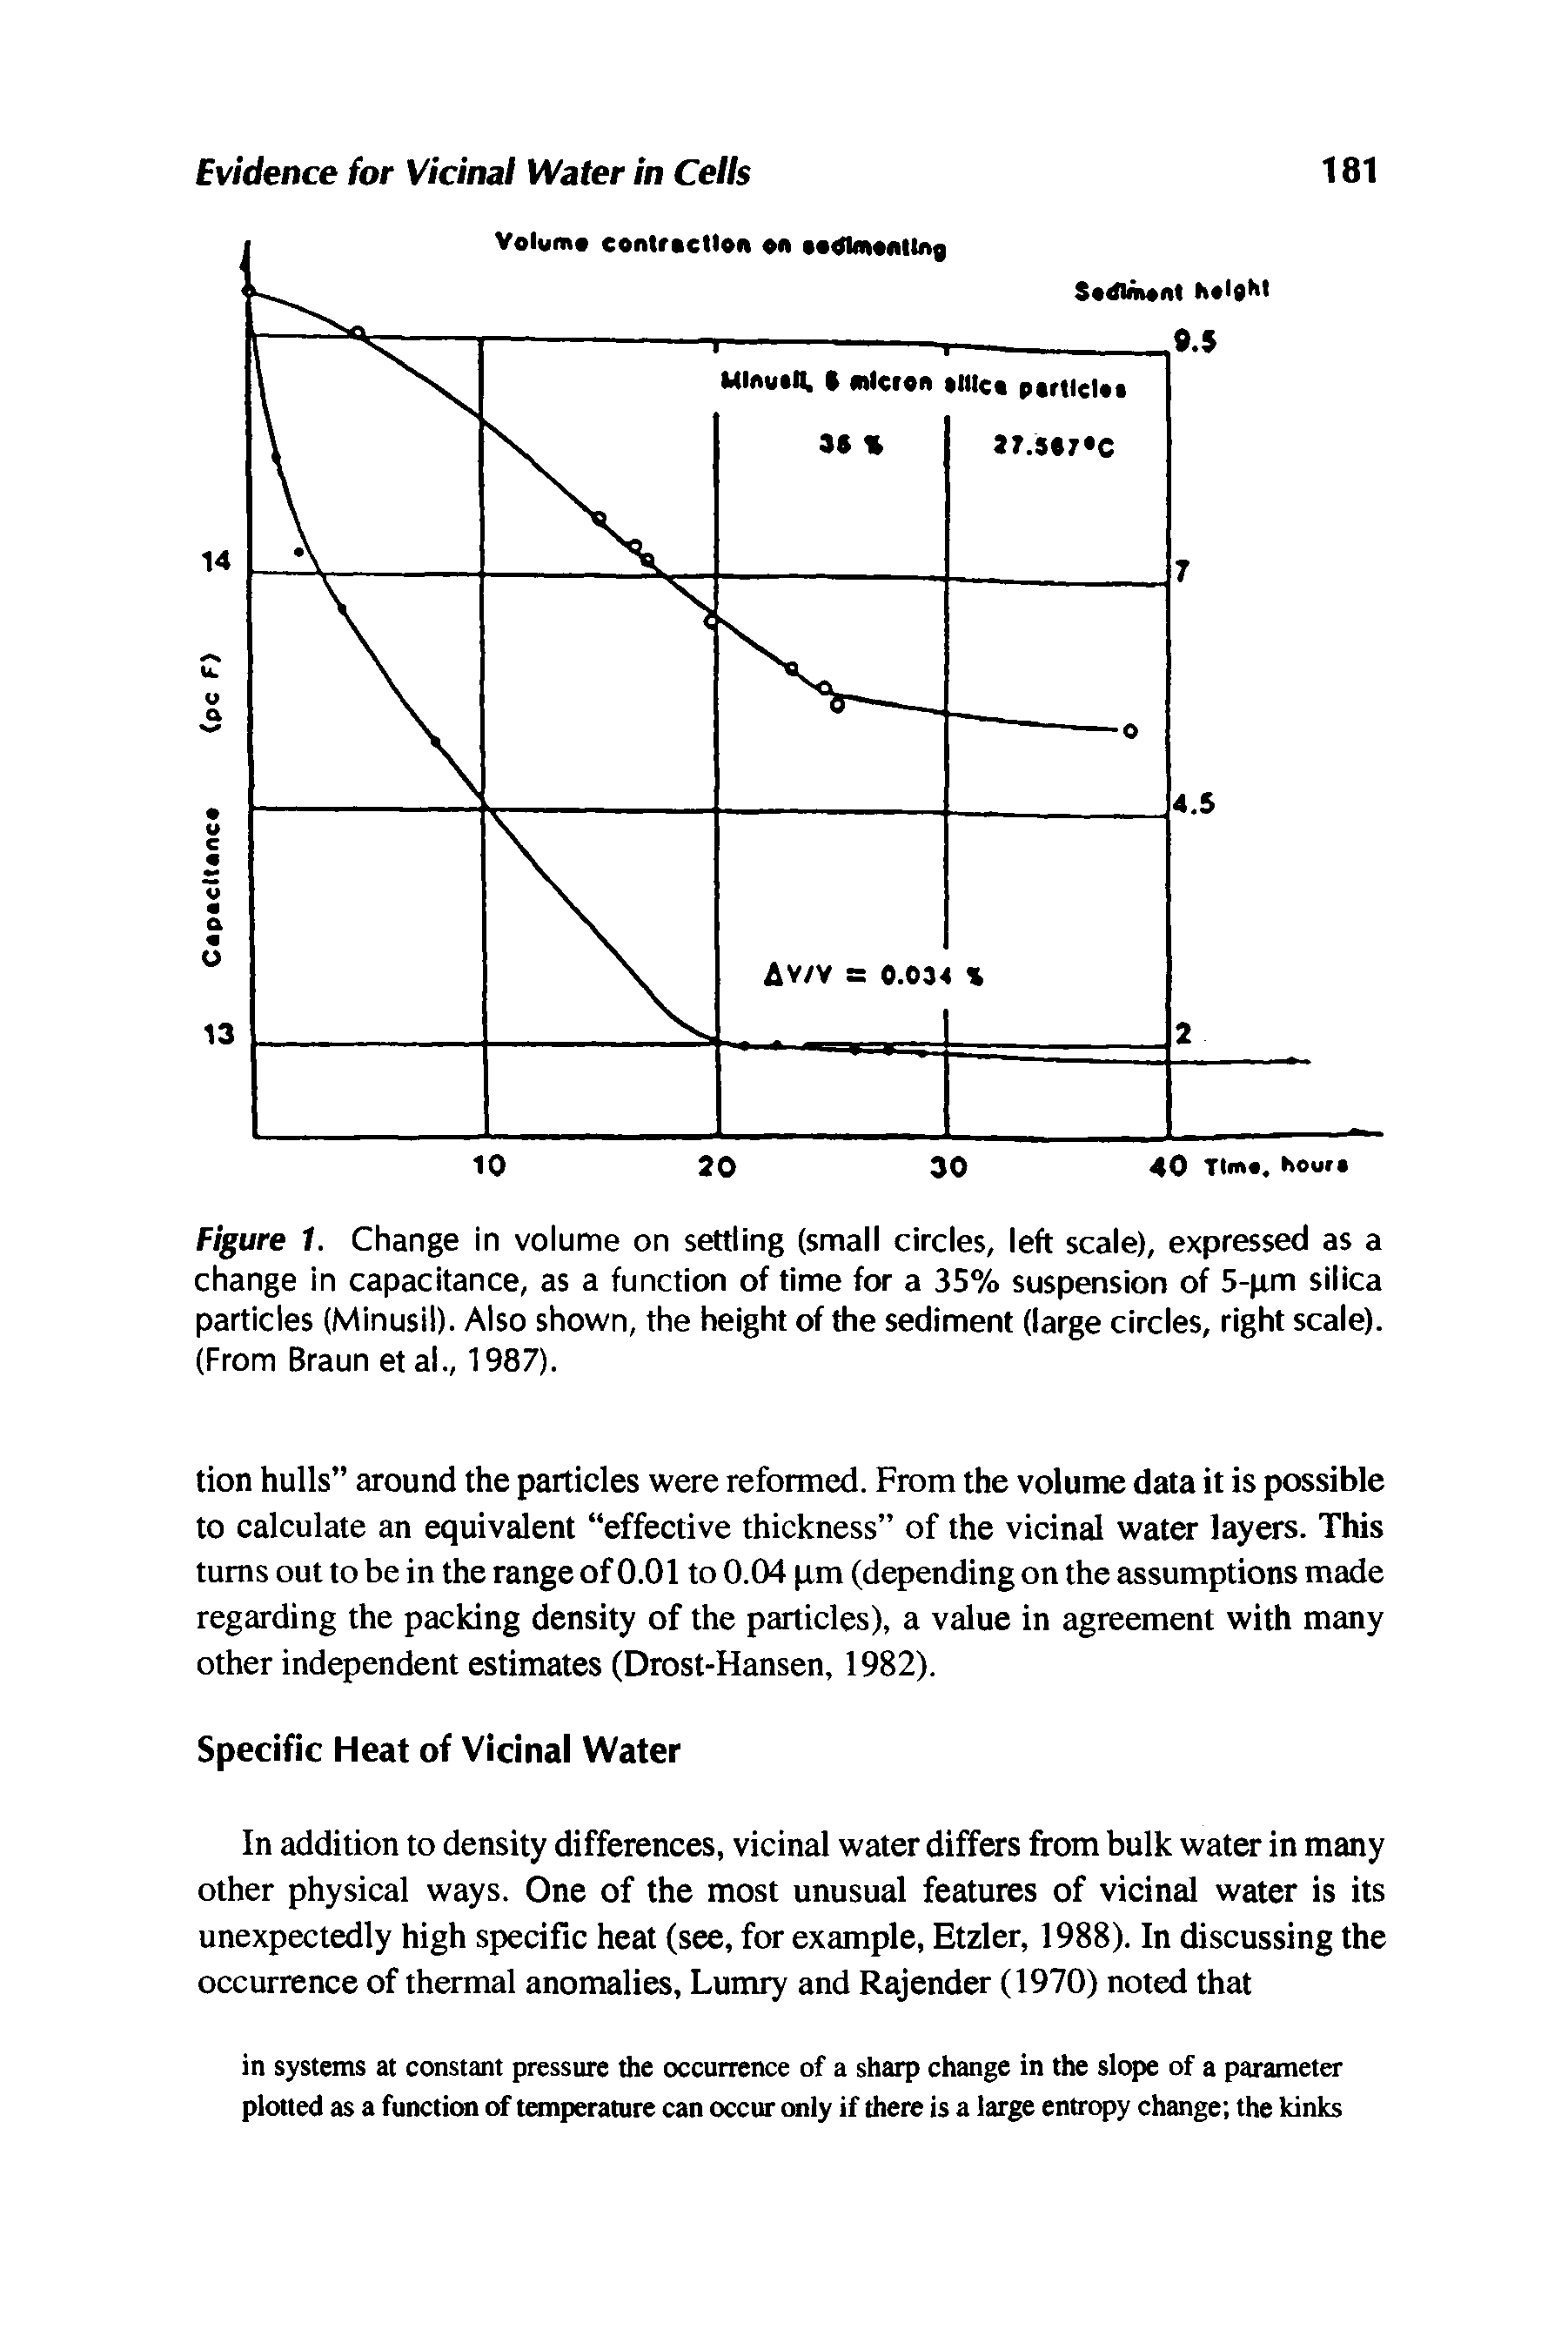 Figure 1. Change in volume on settling (small circles, left scale), expressed as a change in capacitance, as a function of time for a 35% suspension of 5-pm silica particles (Minusil). Also shown, the height of the sediment (large circles, right scale). (From Braun et al., 1987).